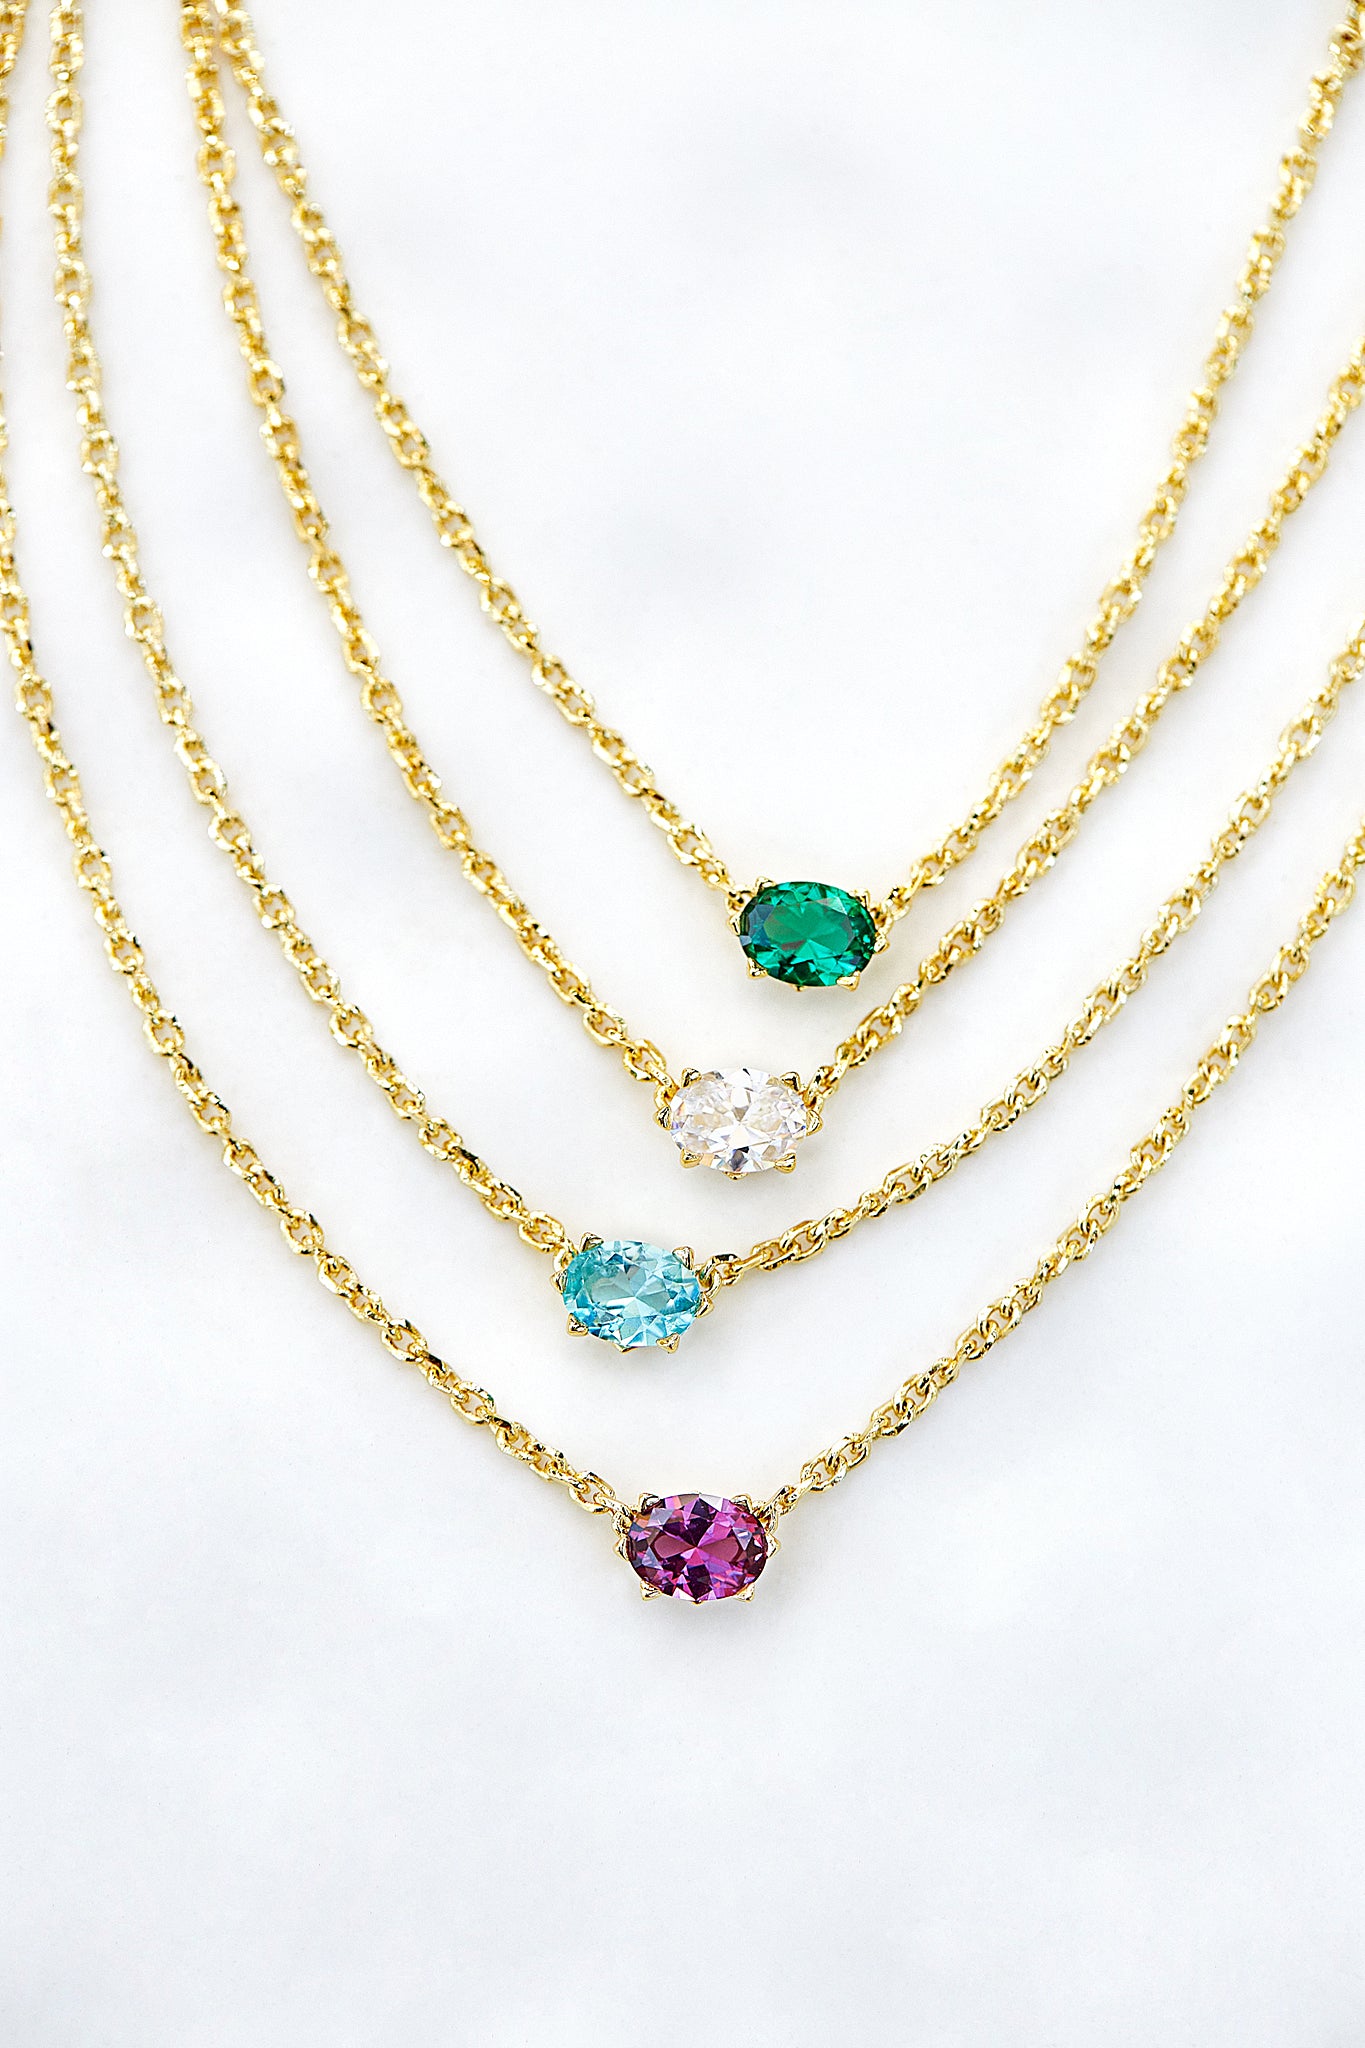 Kendra Scott Updated Birthstone Collection - Cailin Suite